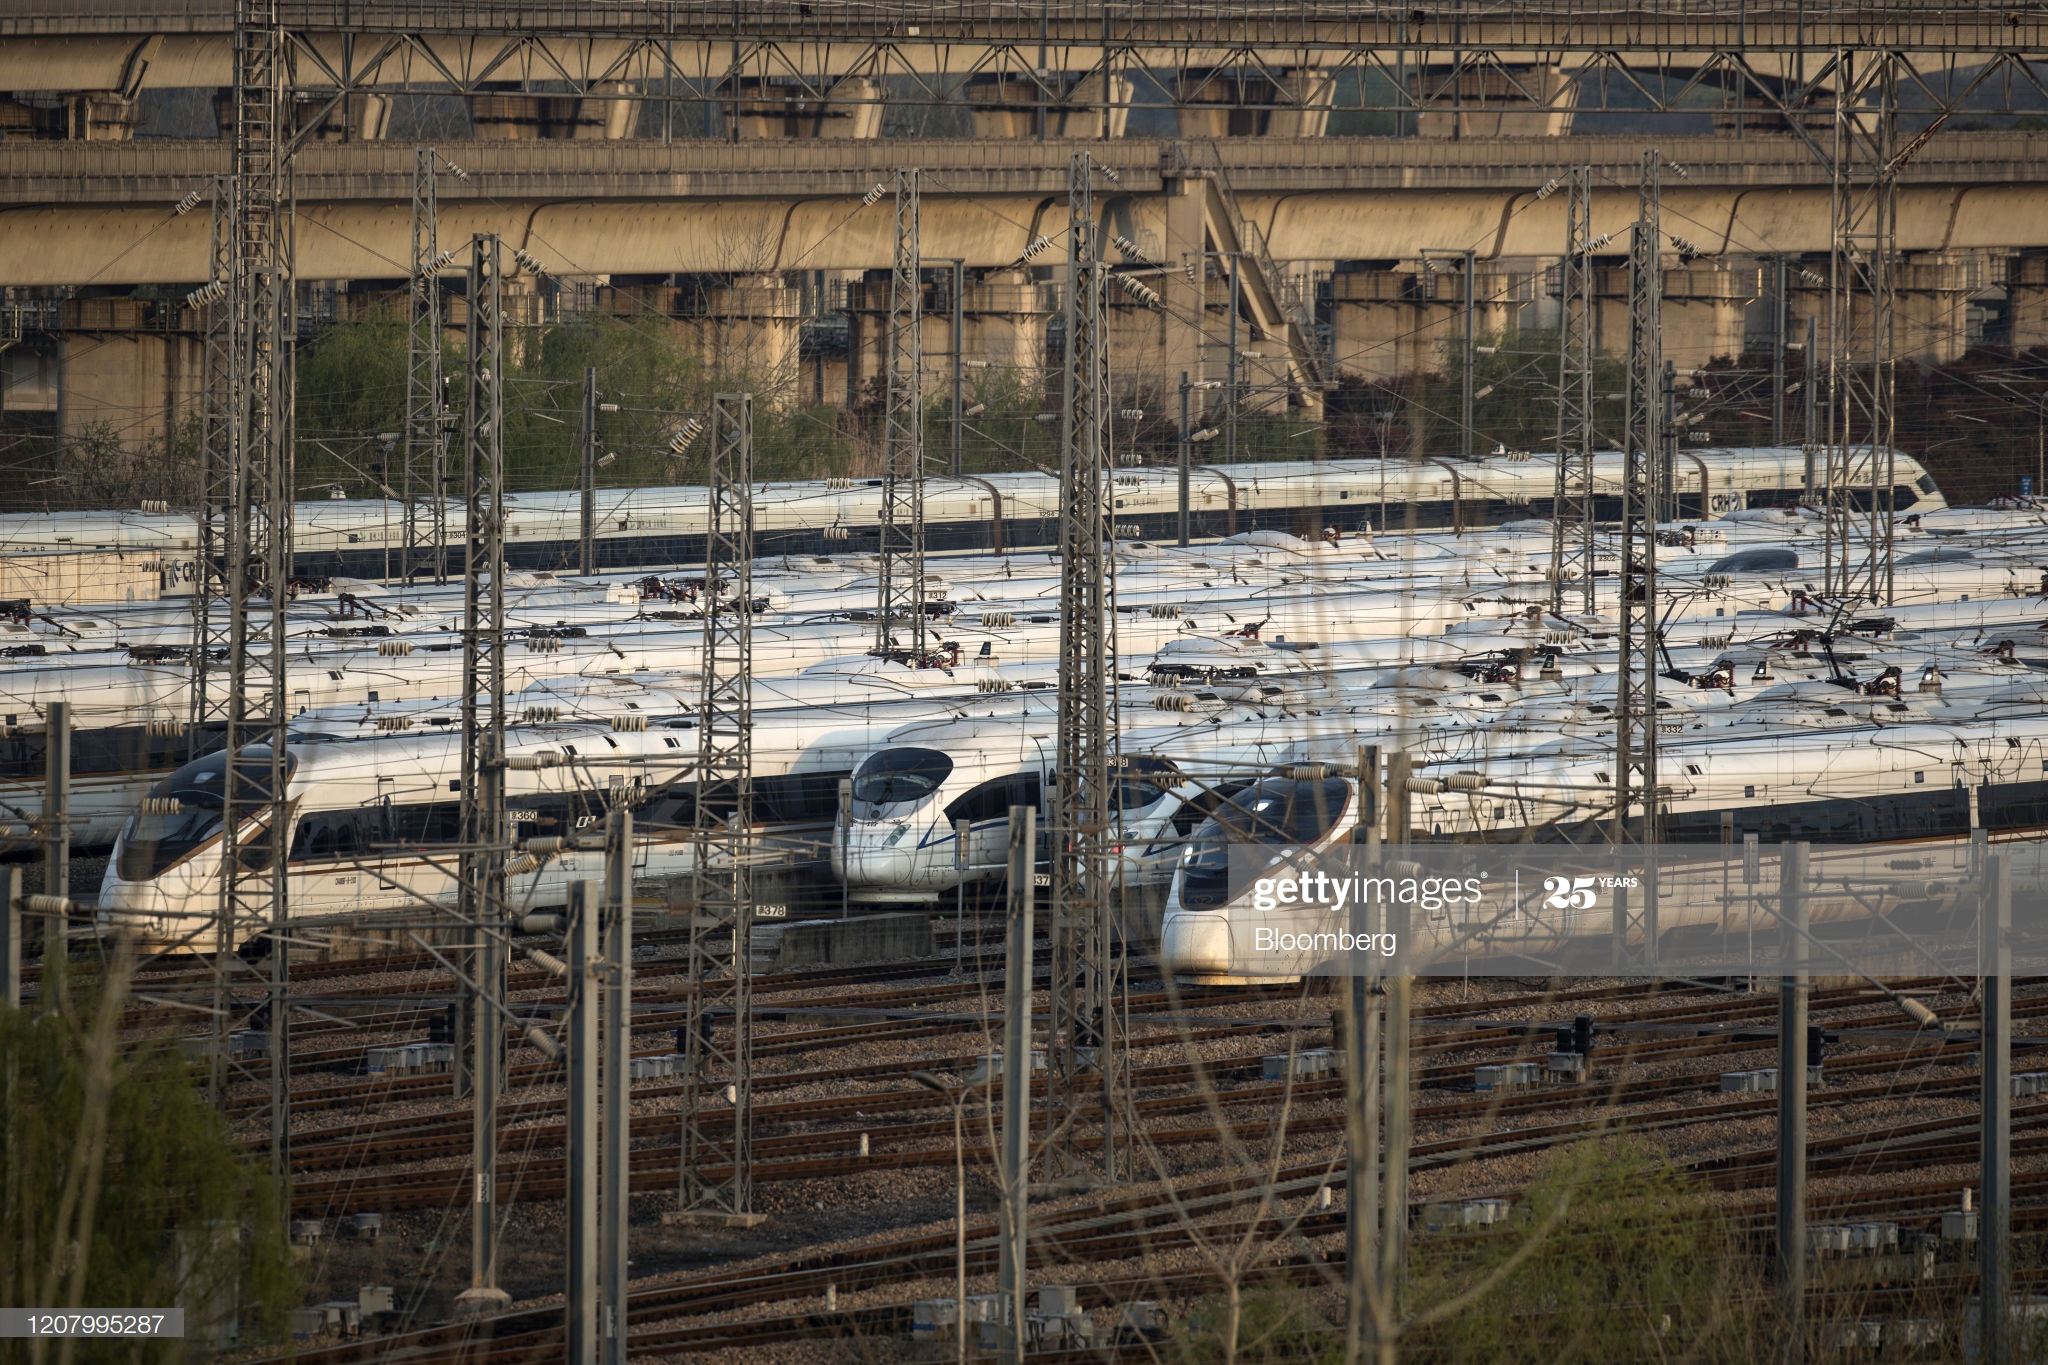 china-railway-highspeed-trains-operated-by-china-railway-corp-sit-in-picture-id1207995287